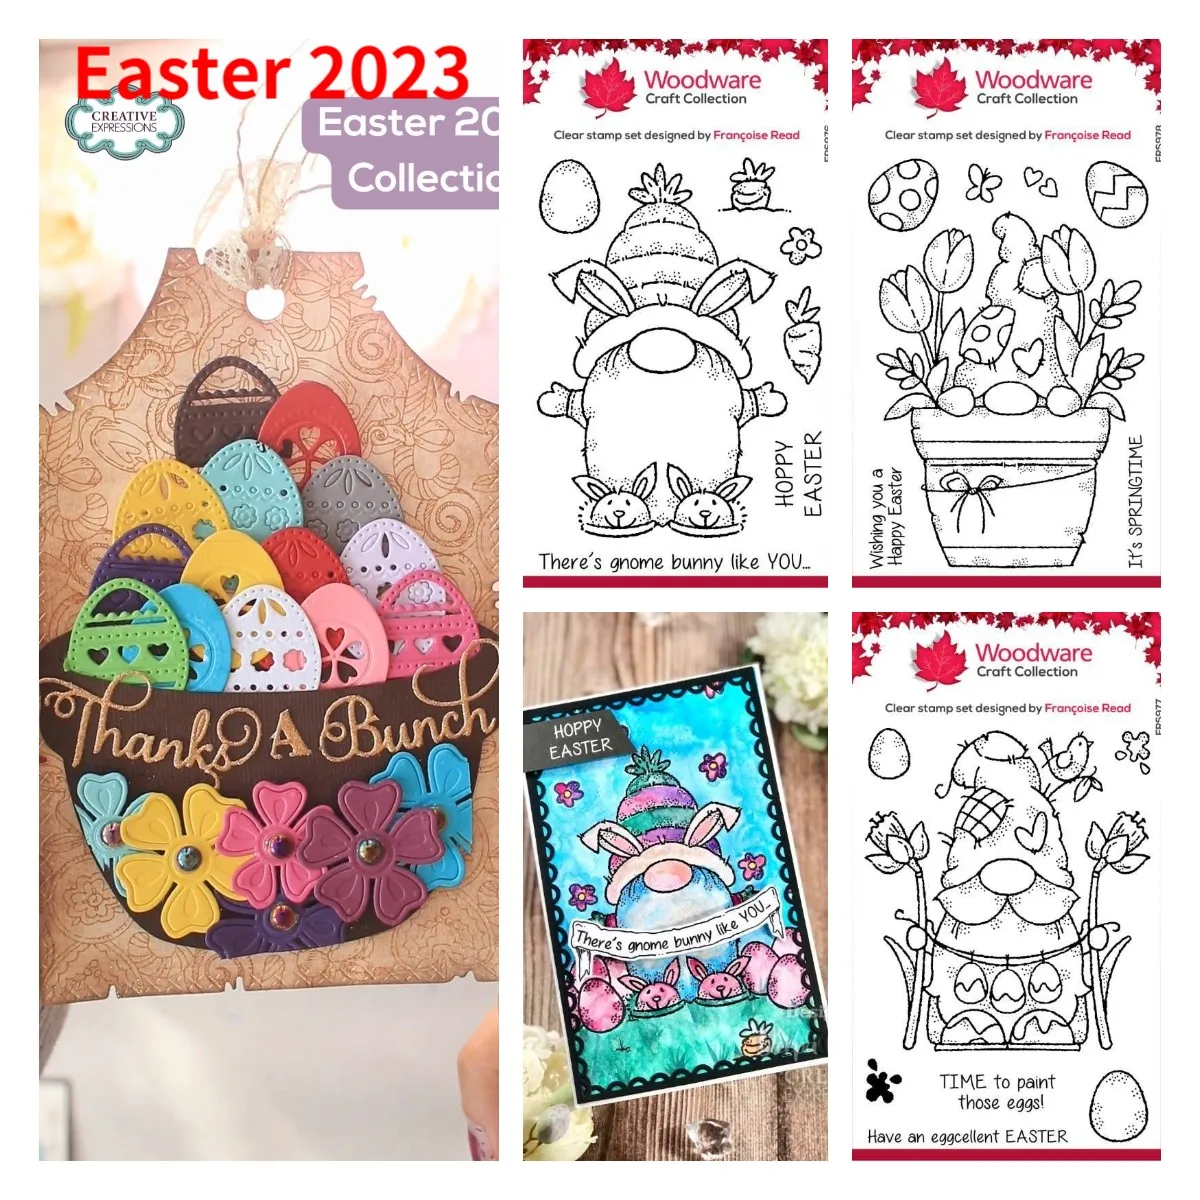 

Easter Flower Pot Gnome Egg Metal Stamps Scrapbook Diary Secoration Embossing Stencil Template Diy Greeting Card Handmade 2023